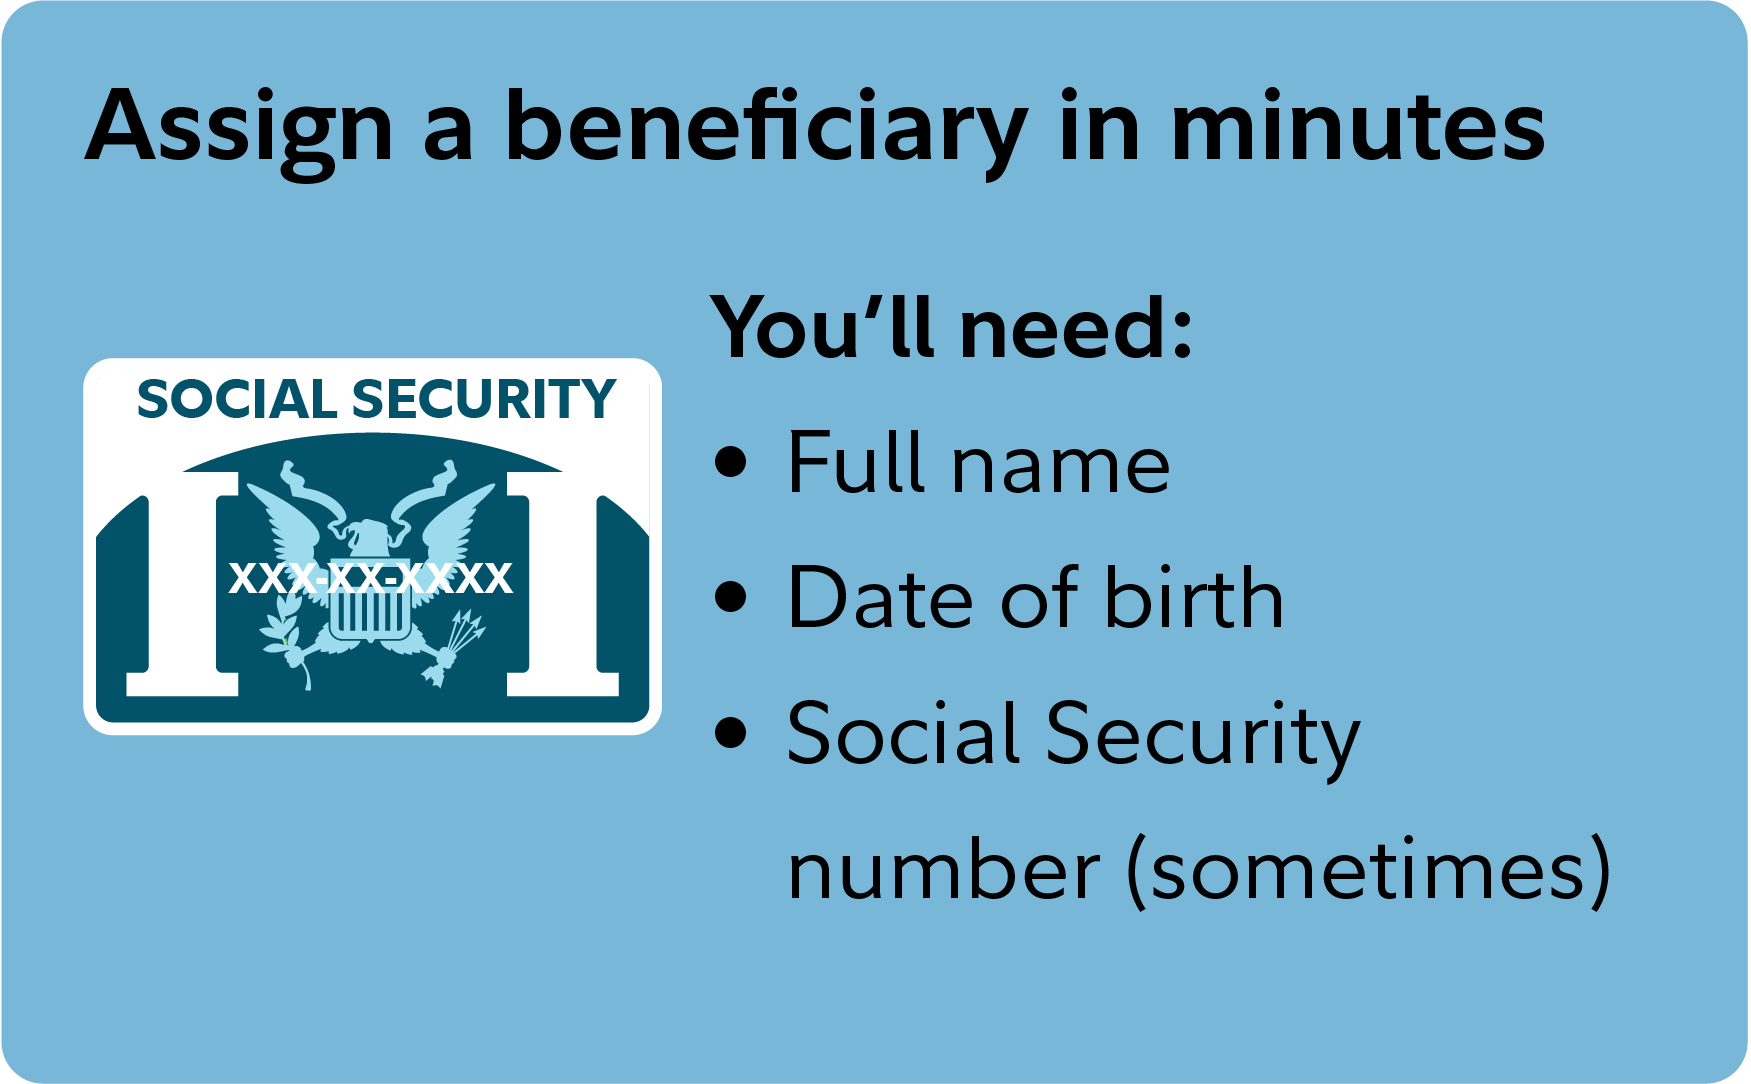 Assign a beneficiary in minutes Assigning a beneficiary only takes minutes: You’ll need their full name, date of birth, and (sometimes) their social security number.